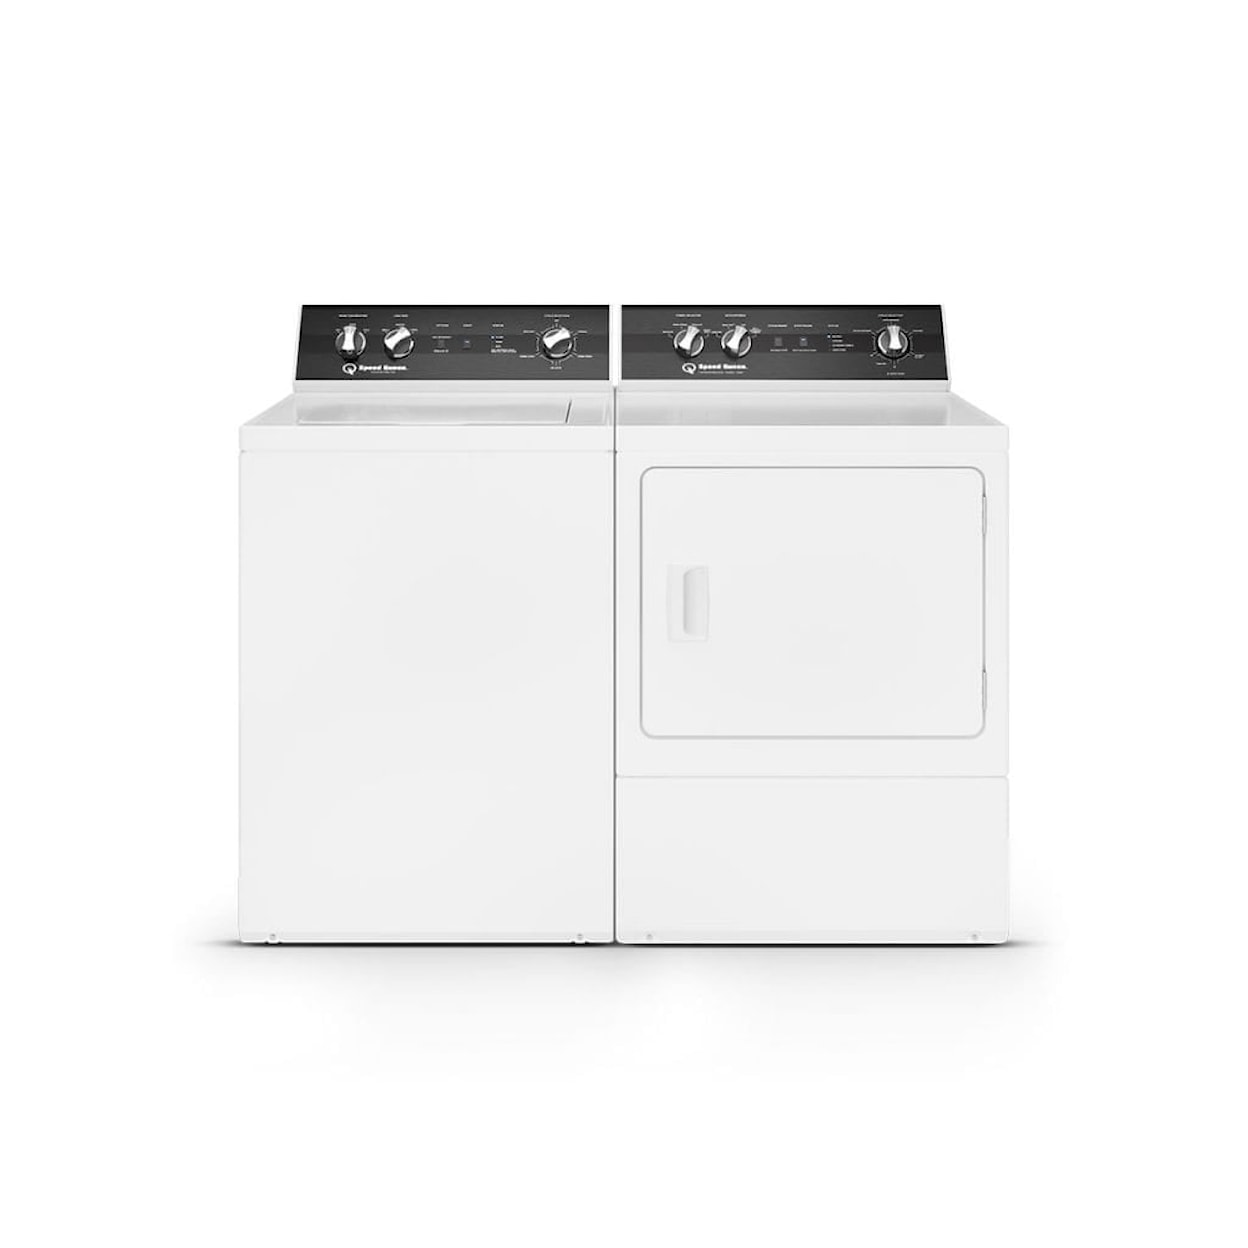 Speed Queen Laundry Front Load Gas Dryer